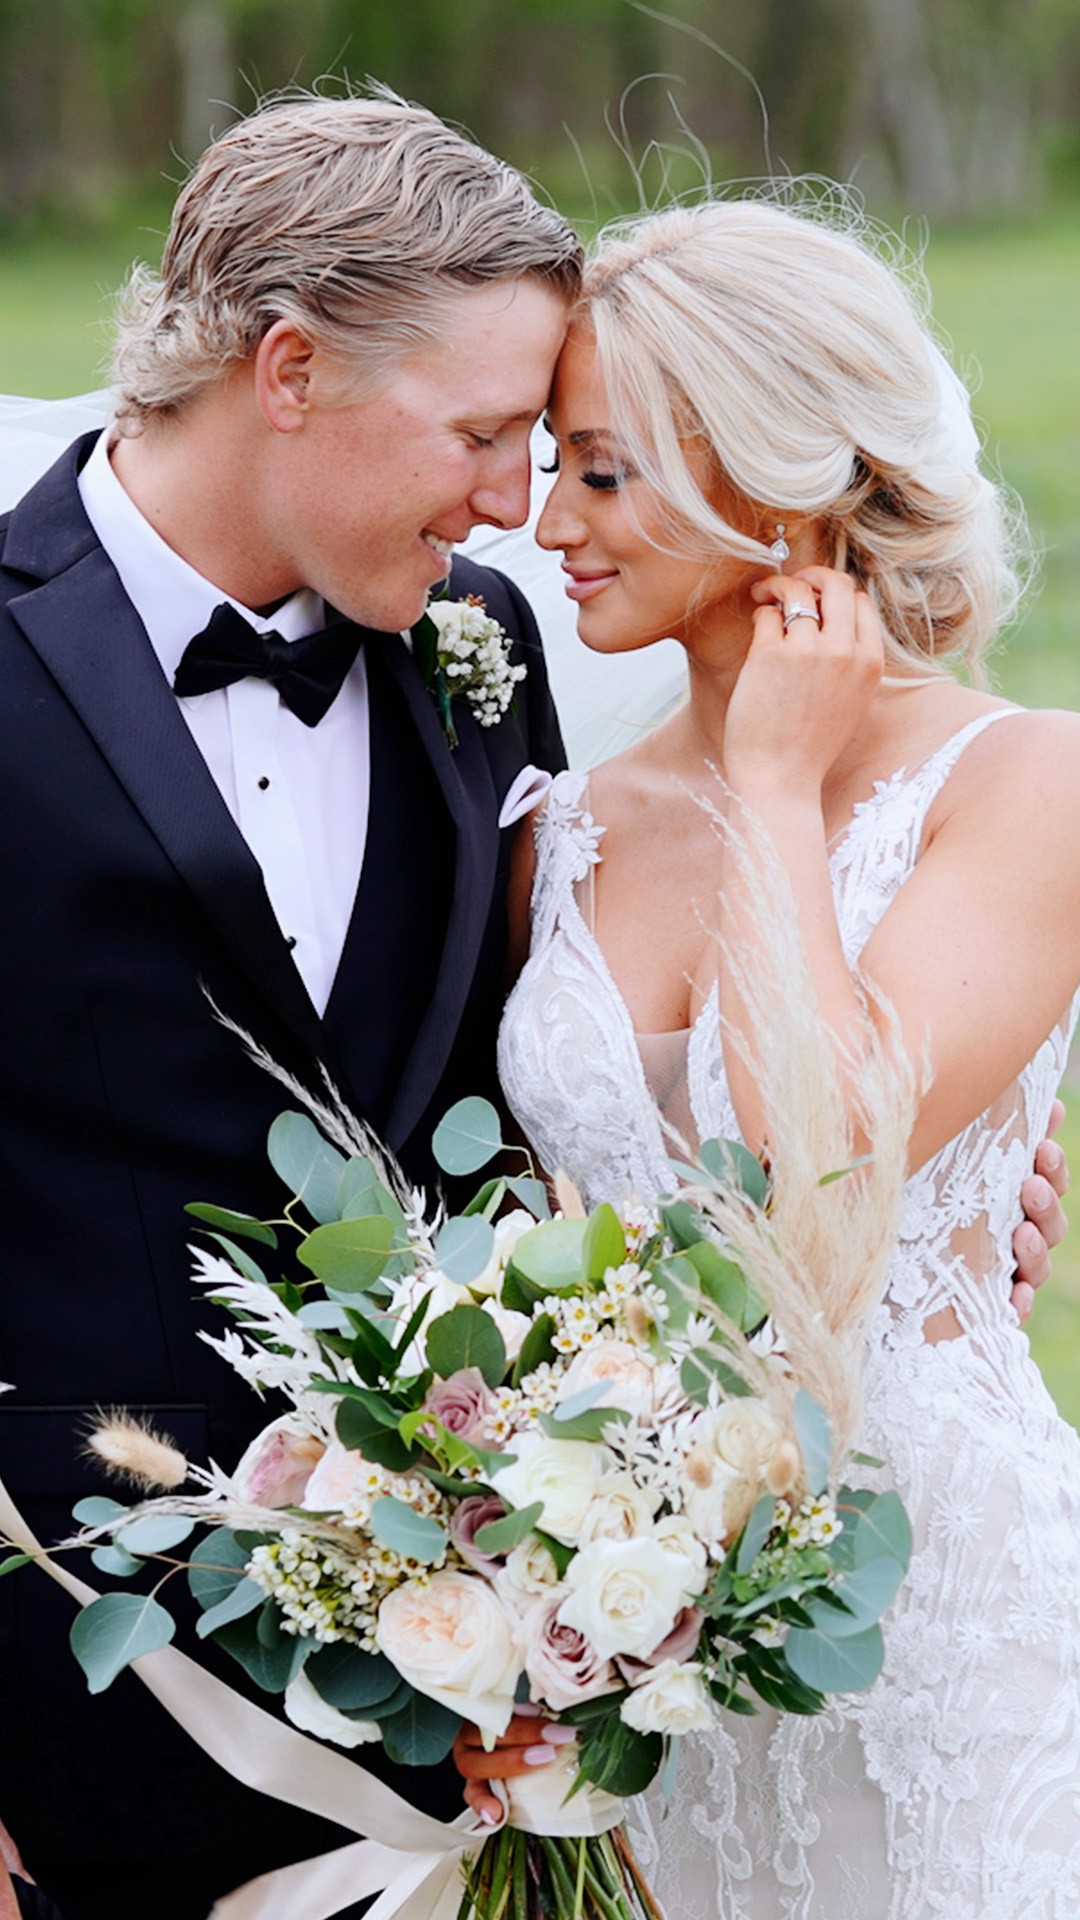 Dating since middle school, Hunter and Gregory officially became husband and wife on April 3, 2021. Relive their most magical day with all the tears, joy, fun and love. Their pup is the sweetest! ❤️ 

Date: April 3rd, 2021
Venue: Still Waters Ranch @thestillwatersranch 
Planner: Laced With Grace Events @lacedwithgraceinfo 
Photographer: Hey Pretty Baby Photography @heyprettybabyphotography 
Videographer: BSR Wedding Films @bsrweddingfilms 
Hair and Makeup: @sunkissedandmadeup 
Florist: Monica's Brides @monicasbrides 
Cake: Bavarian Cakery @bavariancakeryhouston 
DJ: J&A Entertainment 
Catering: Ivett's Italian Grill

#wedding #weddingvideo #weddingvows #dogsinweddings #soulmates #dallasweddingvideographer #houstonweddingphotographer #houstonweddingvideographer #houstonweddingplanner #texasweddingvenue #bsrweddingfilms